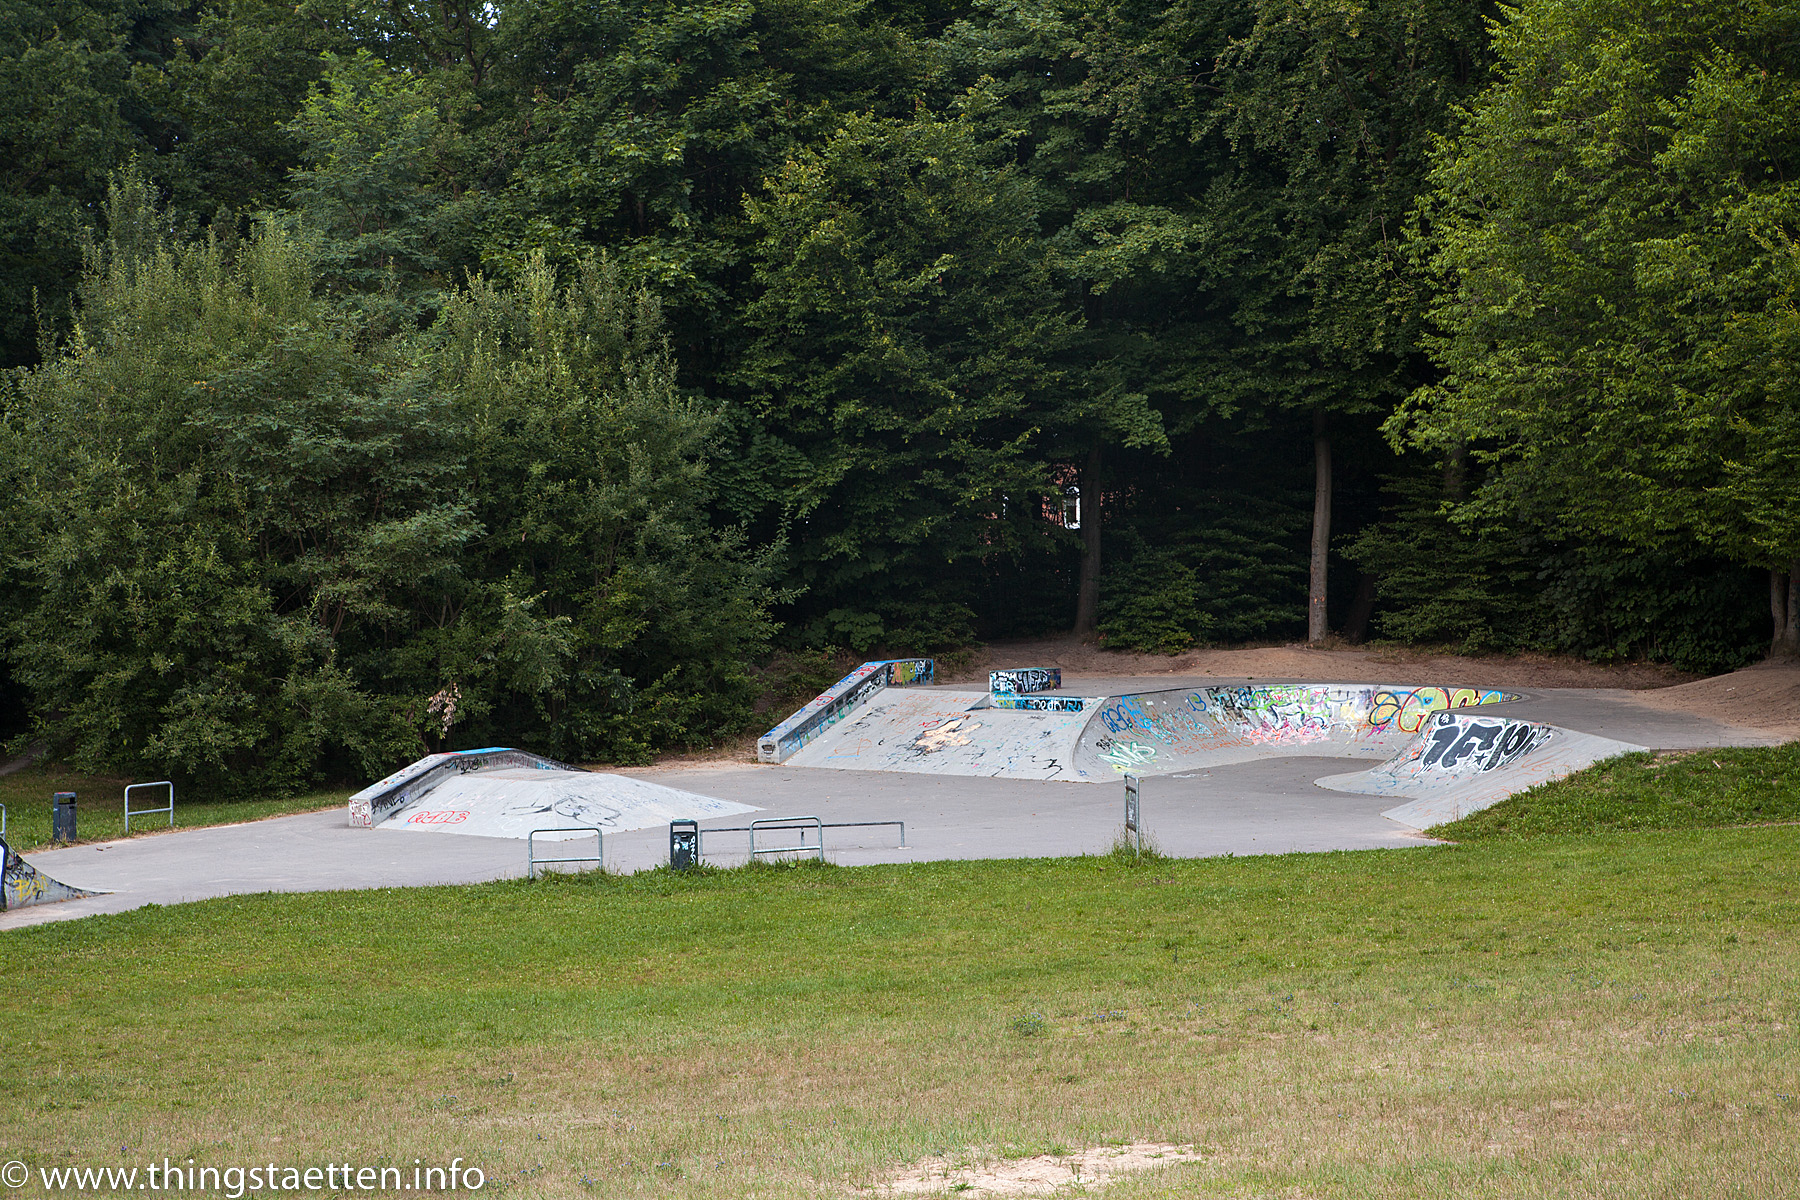 Skate ramps sprayed with graffiti at the former NS open-air stage